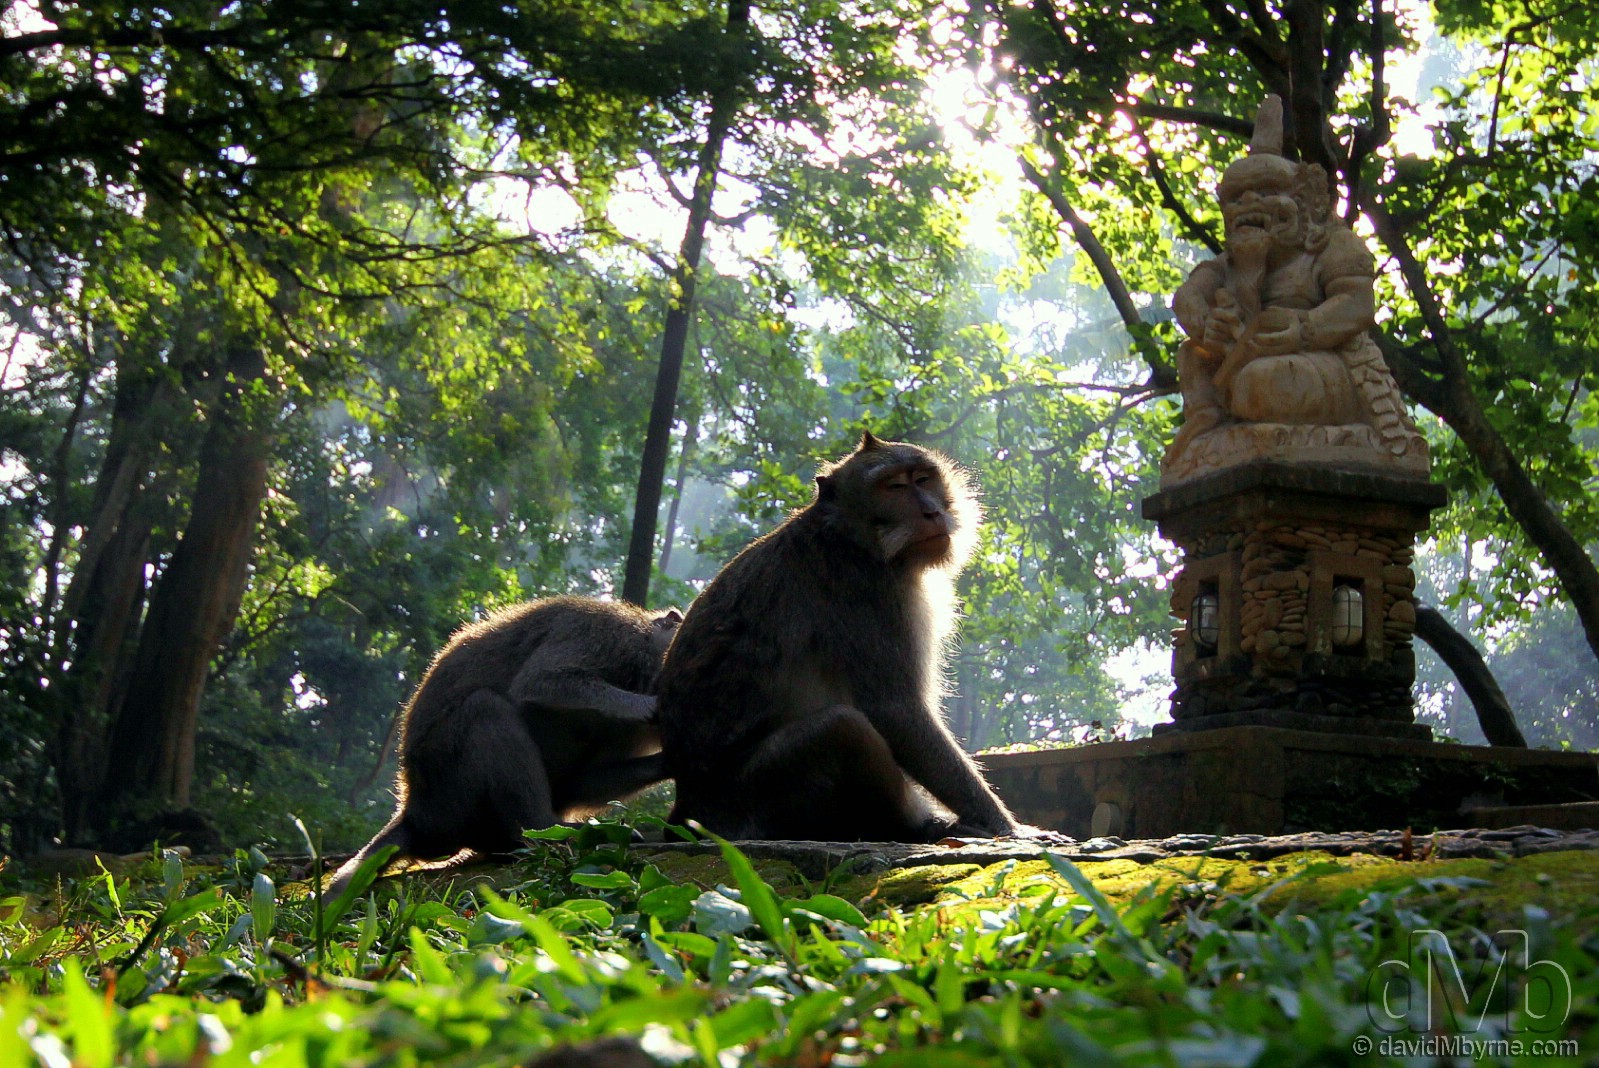 The sacred Monkey Forest in Ubud, Bali, Indonesia. June 15th, 2012 (EOS 60D || Sigma 10-20mm || 20mm, 1/250sec, f/5.6, iso320)